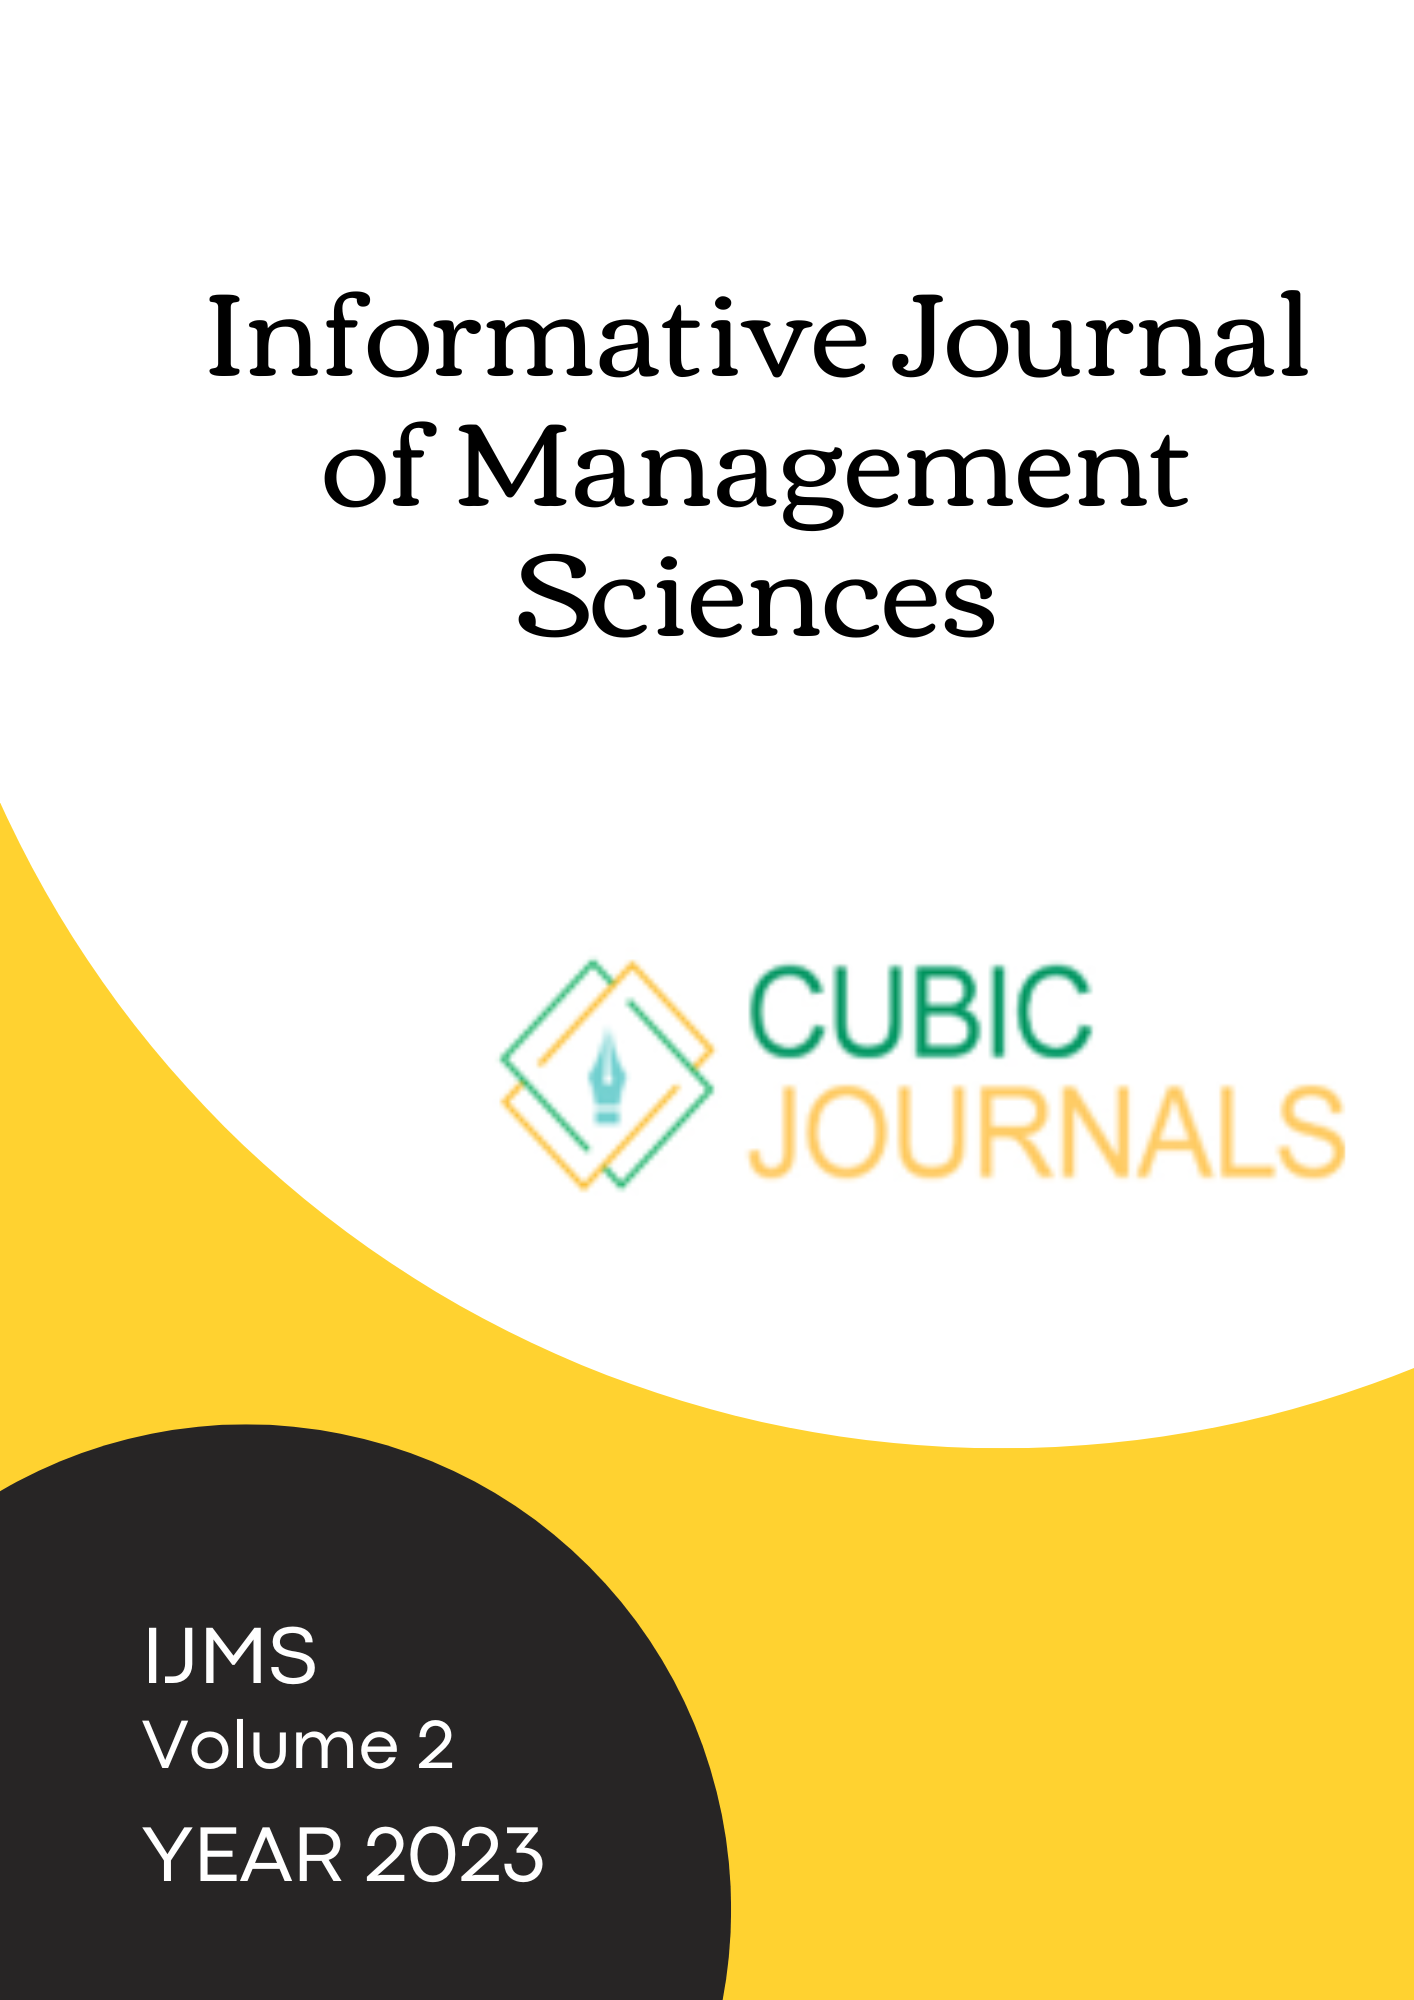 Informative journal of management sciences research paper